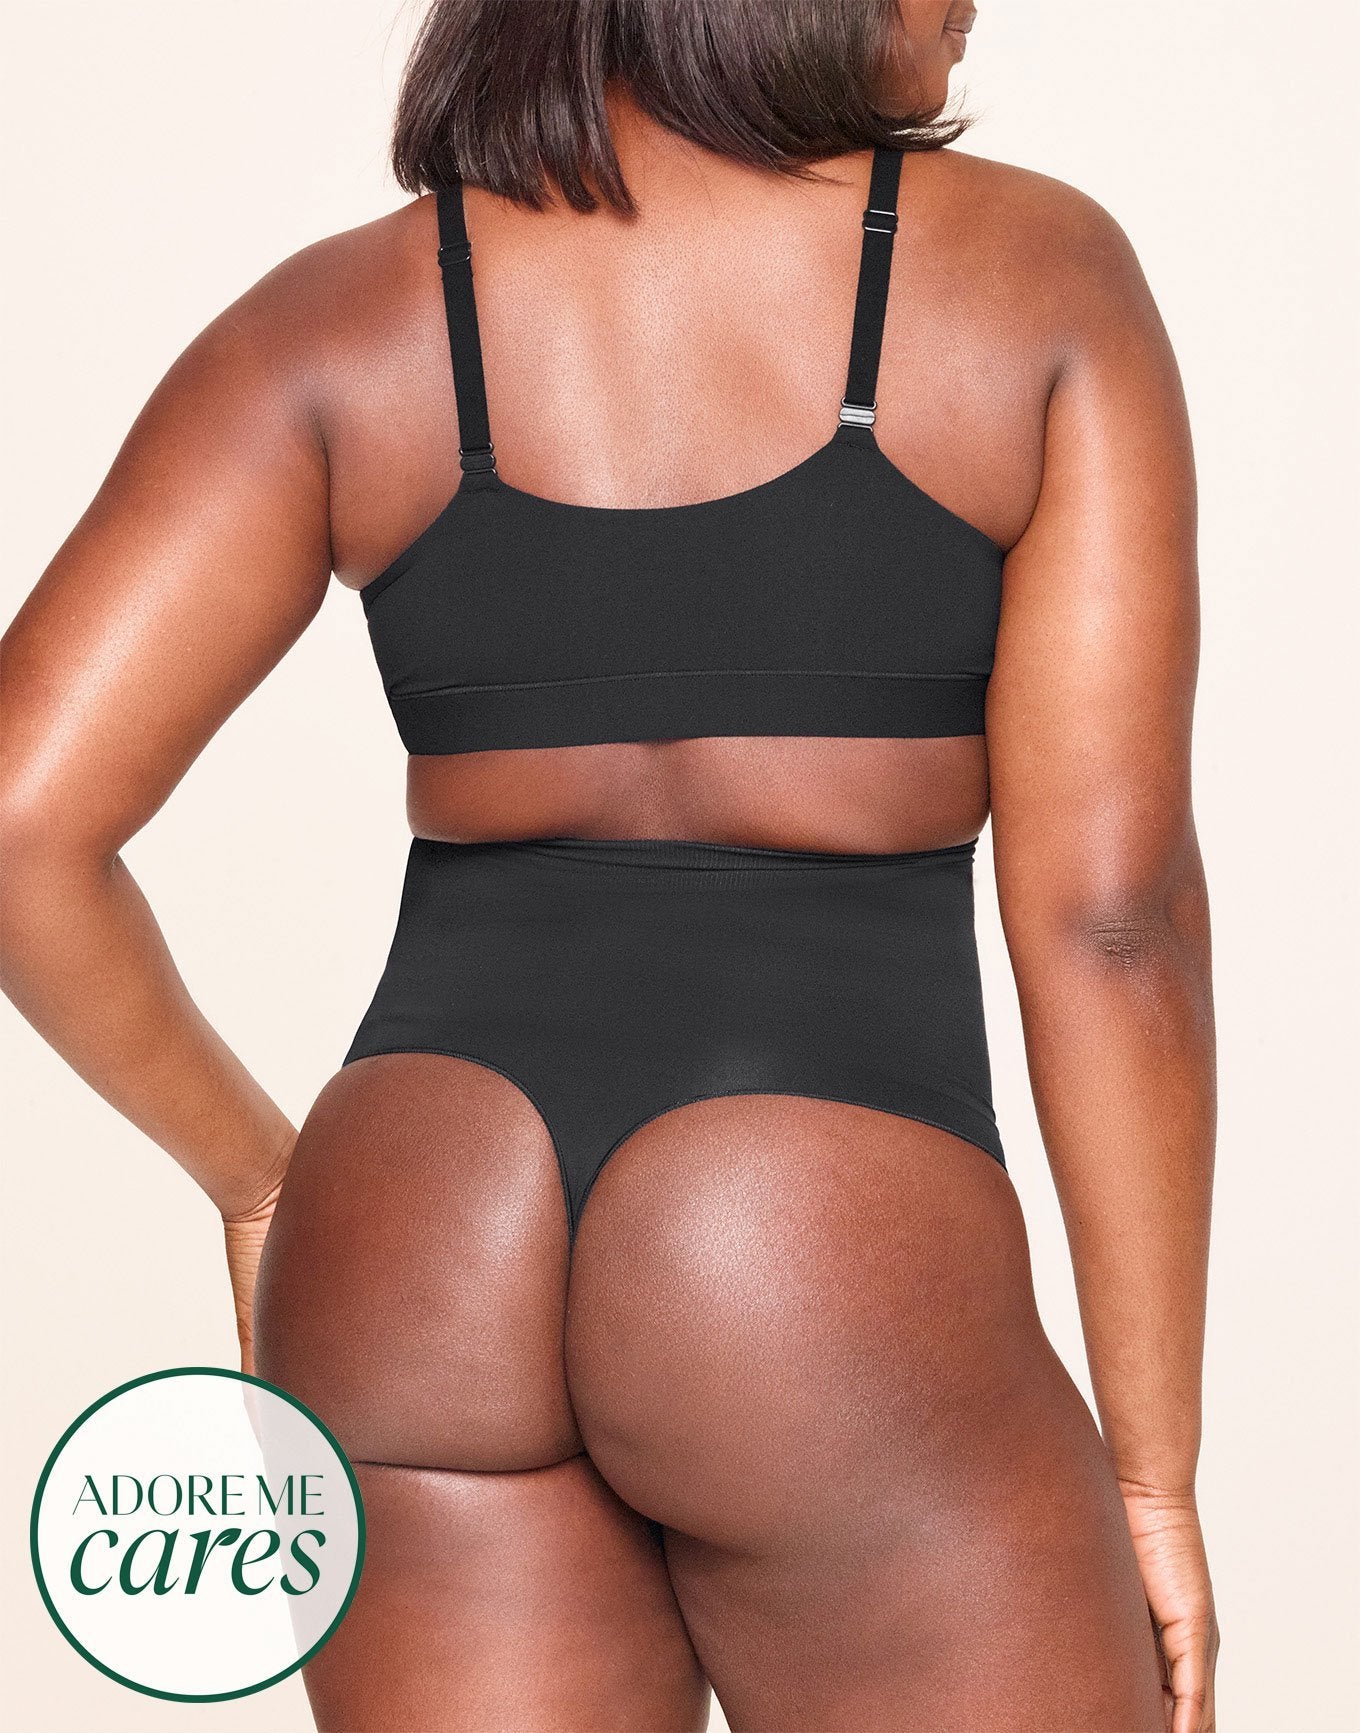 nueskin Elodie High-Compression High-Waist Thong in color Jet Black and shape thong